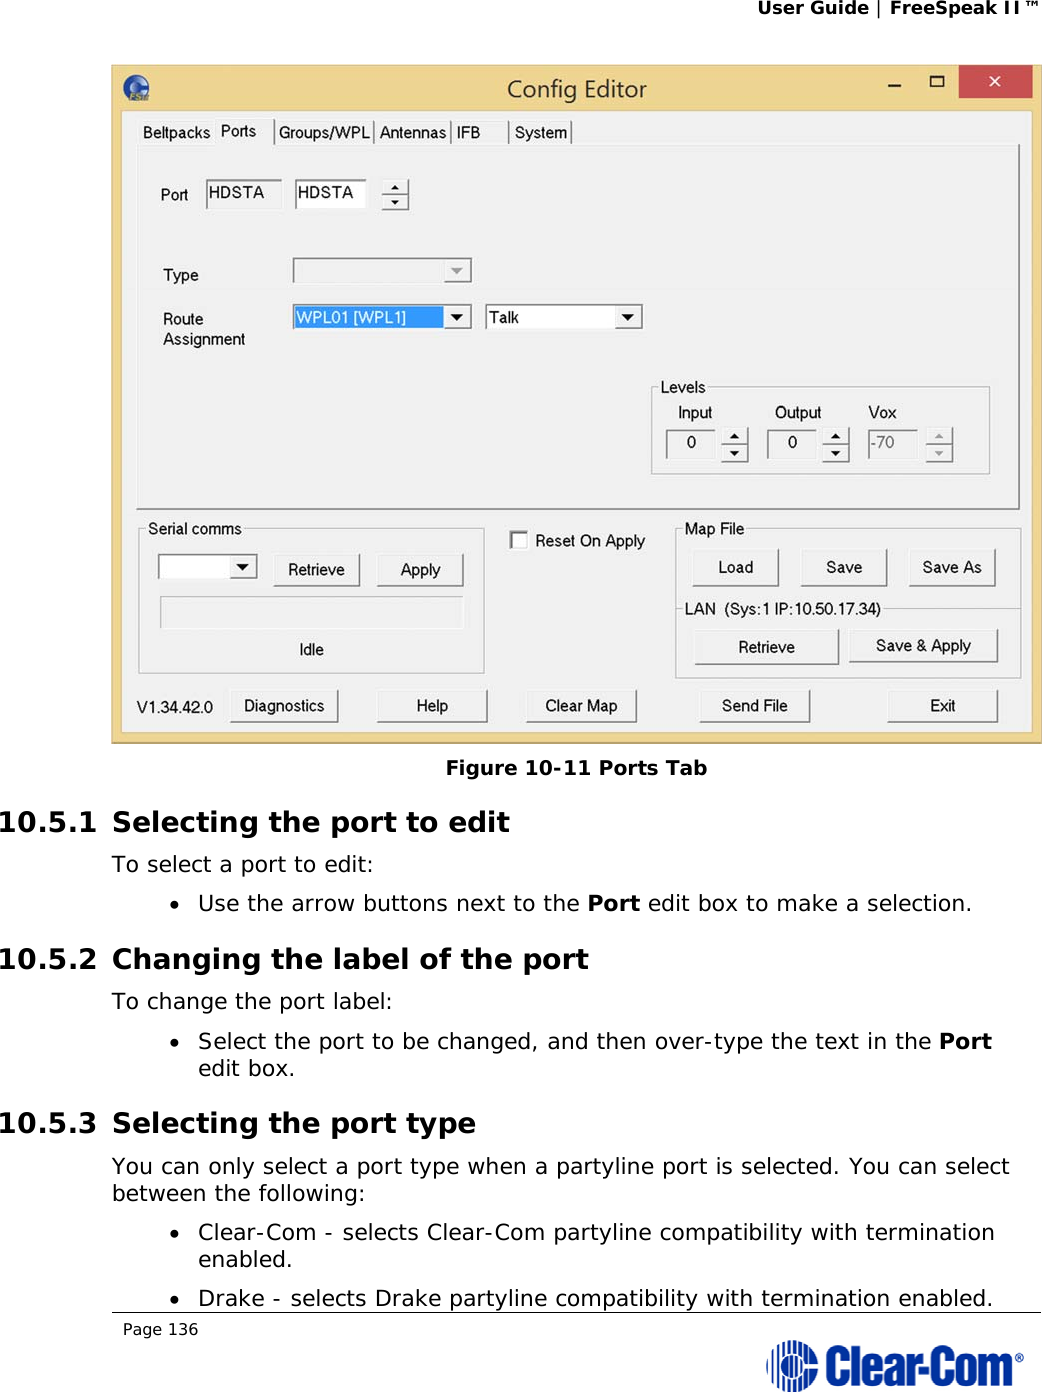 User Guide | FreeSpeak II™  Page 136   Figure 10-11 Ports Tab 10.5.1 Selecting the port to edit To select a port to edit:  Use the arrow buttons next to the Port edit box to make a selection. 10.5.2 Changing the label of the port To change the port label:  Select the port to be changed, and then over-type the text in the Port edit box. 10.5.3 Selecting the port type You can only select a port type when a partyline port is selected. You can select between the following:  Clear-Com - selects Clear-Com partyline compatibility with termination enabled.  Drake - selects Drake partyline compatibility with termination enabled. 